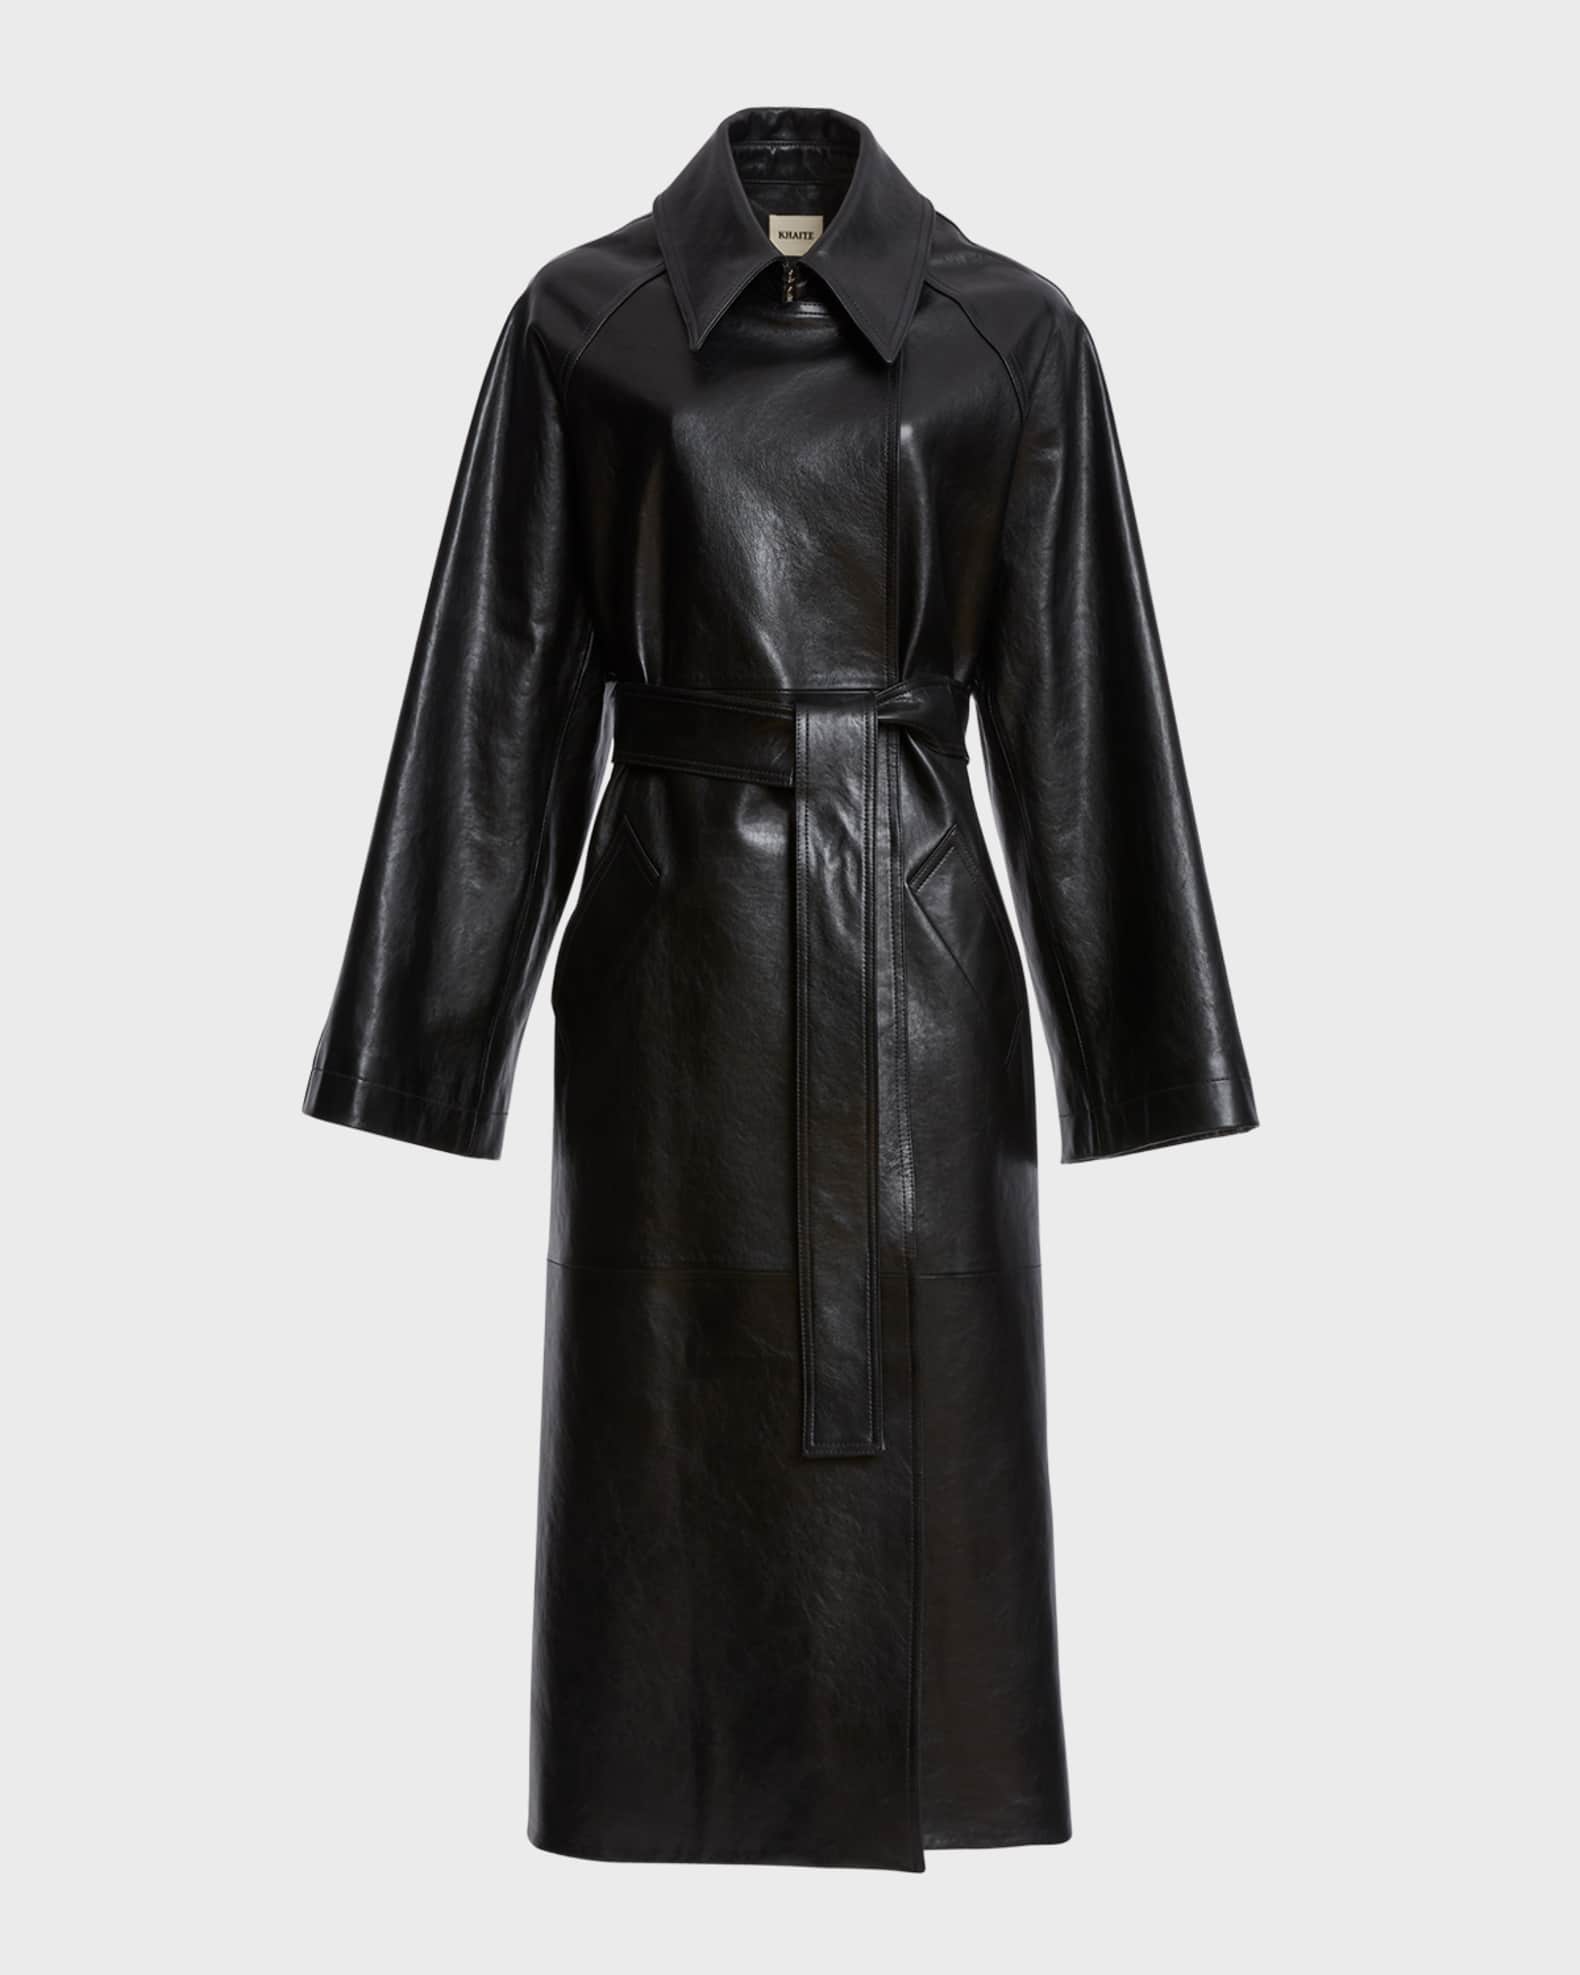 Khaite Minnie Belted Leather Long Trench Coat | Neiman Marcus